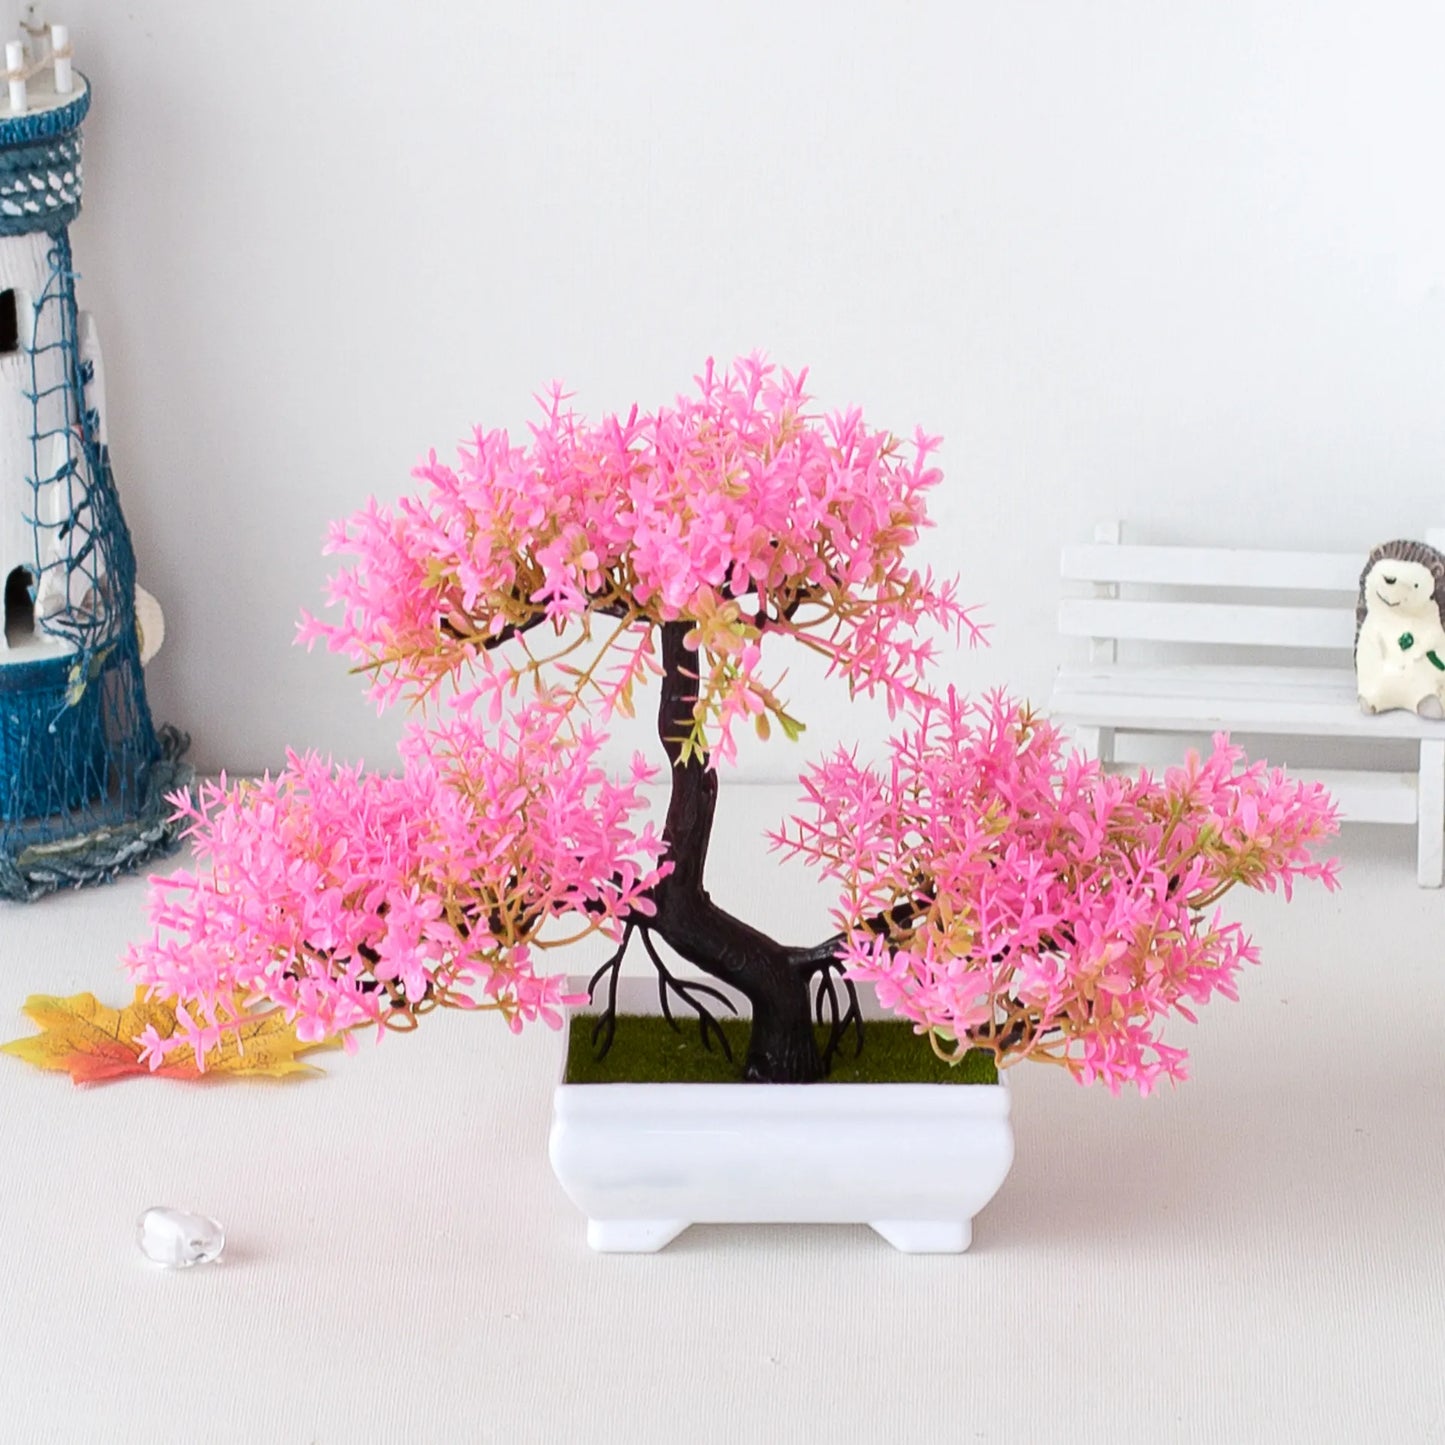 Artificial Plant Bonsai Small Tree Pot Fake Plant Flower Potted Decoration Home Hotel Garden Decoration Room Table Decoration